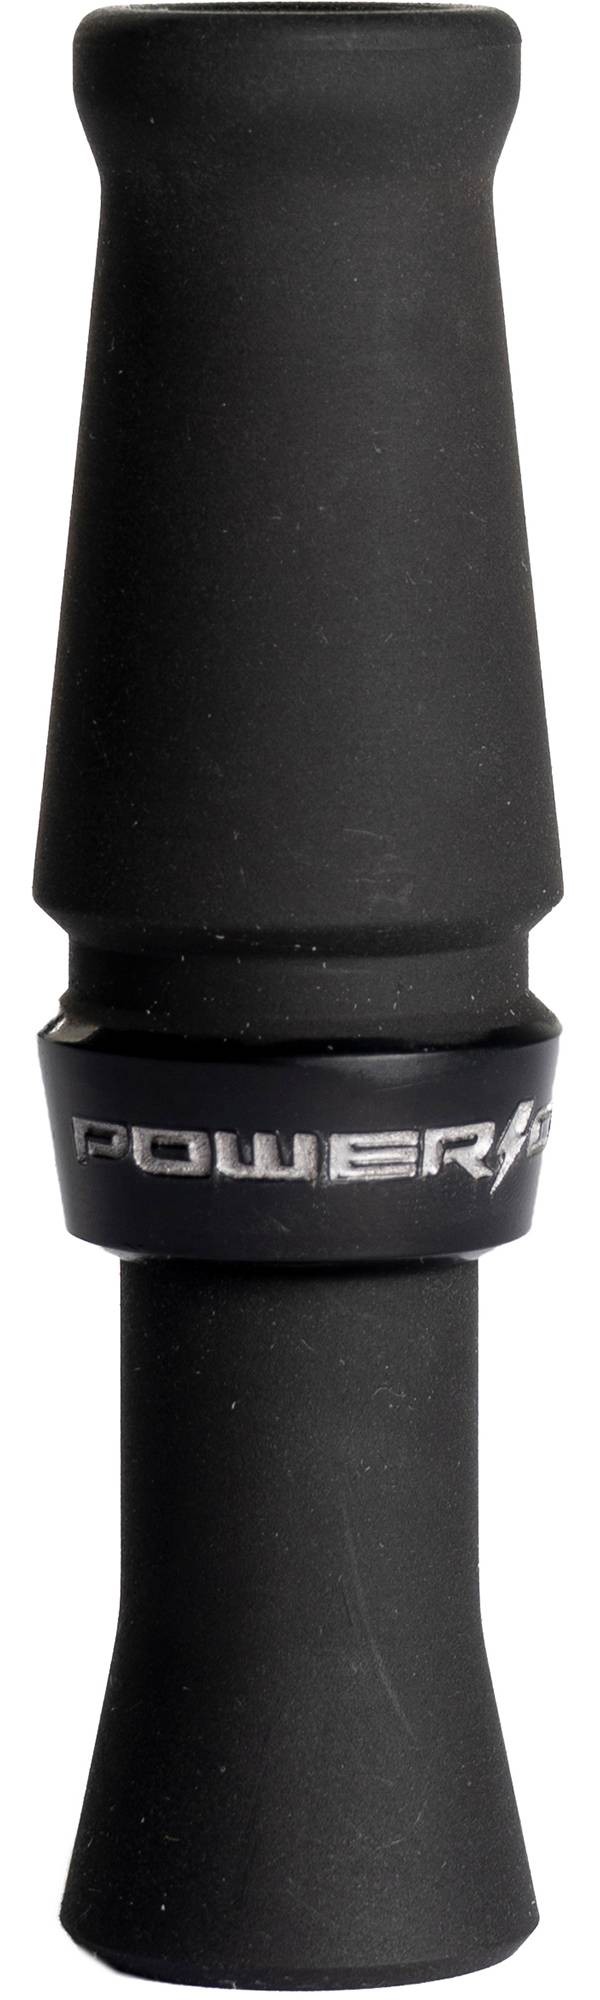 Power Calls Volt 2 Duck Call product image